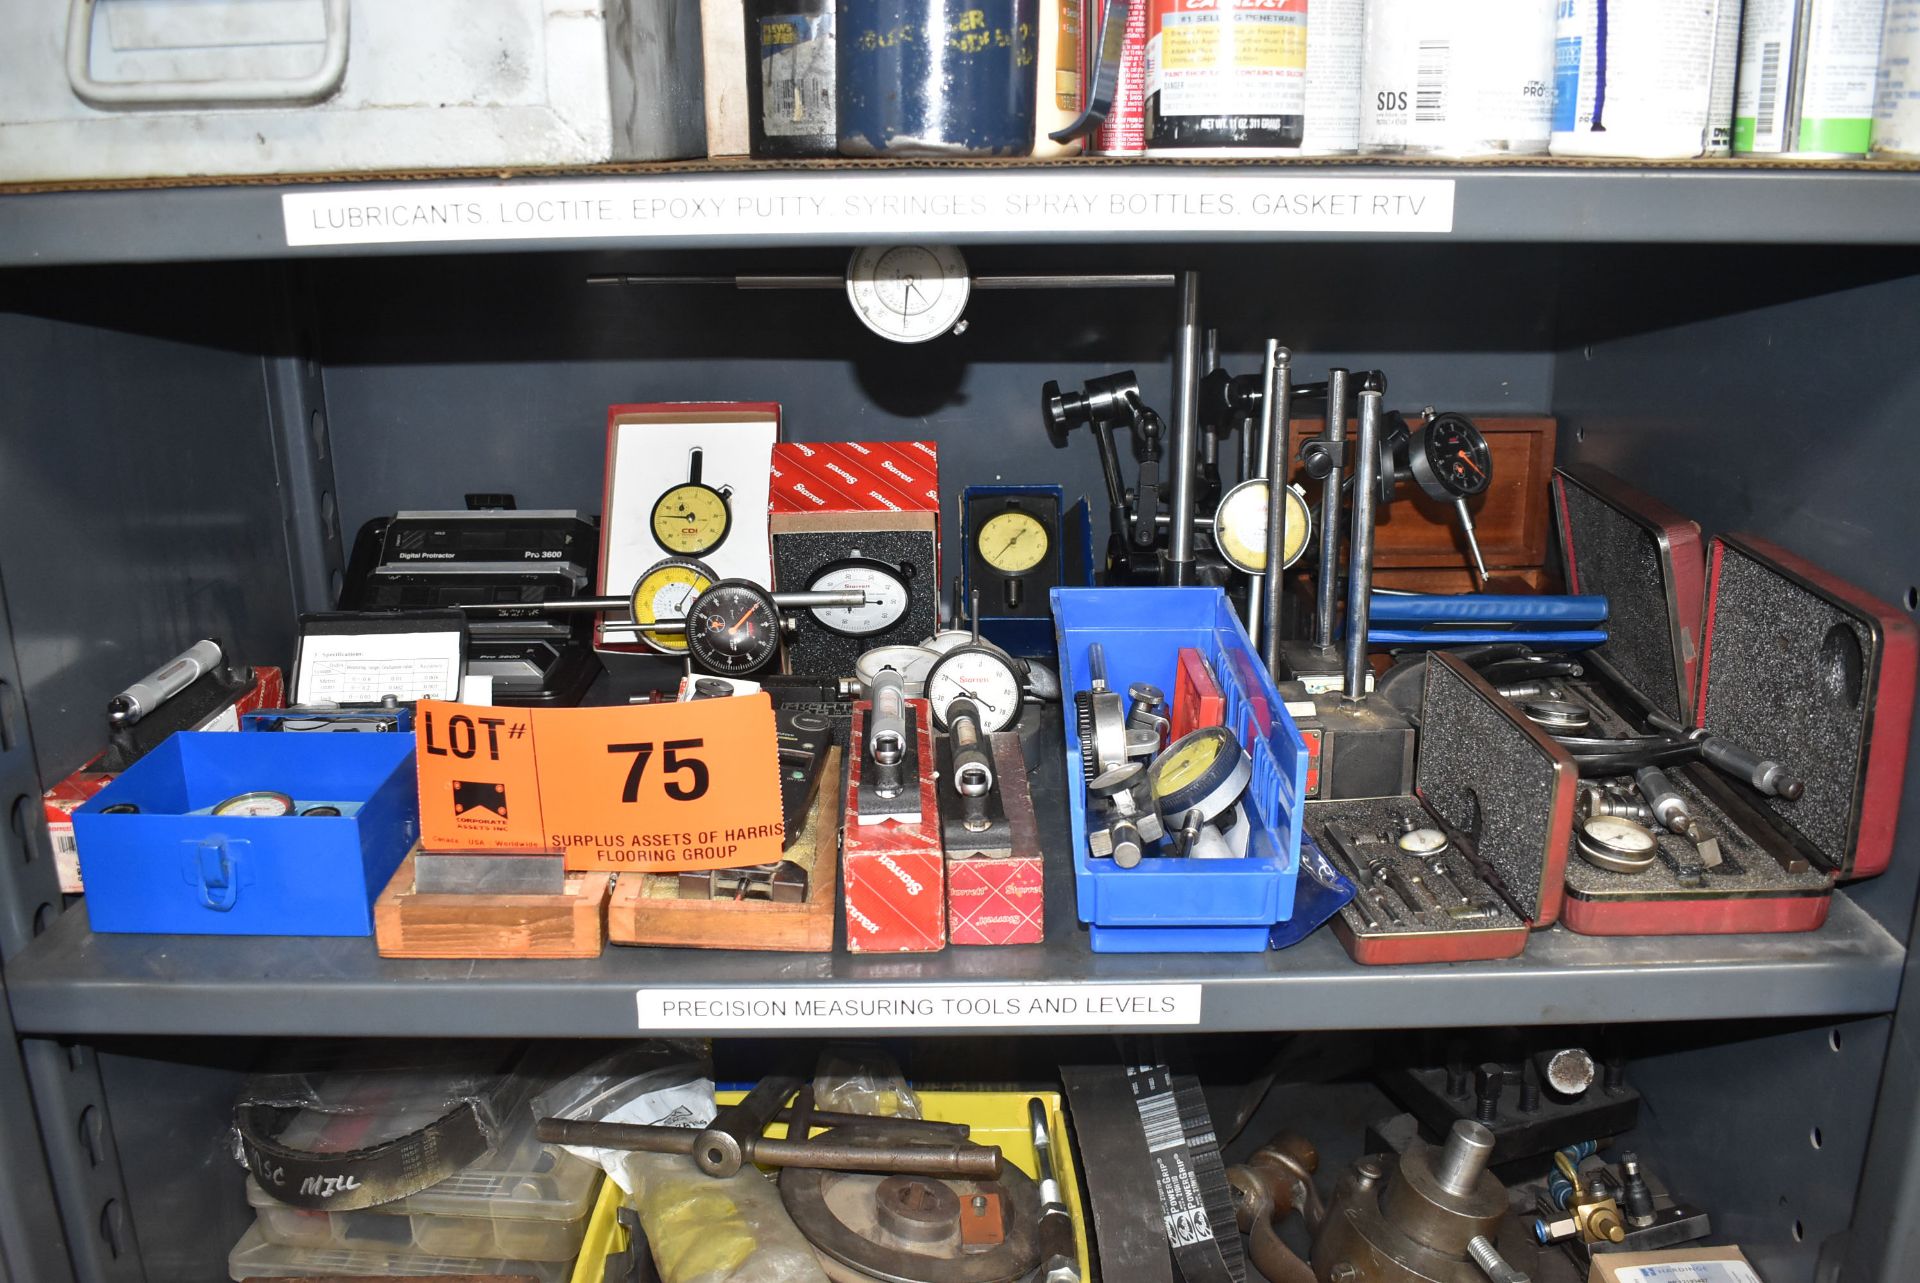 LOT/ CONTENTS OF SHELF - INSPECTION EQUIPMENT